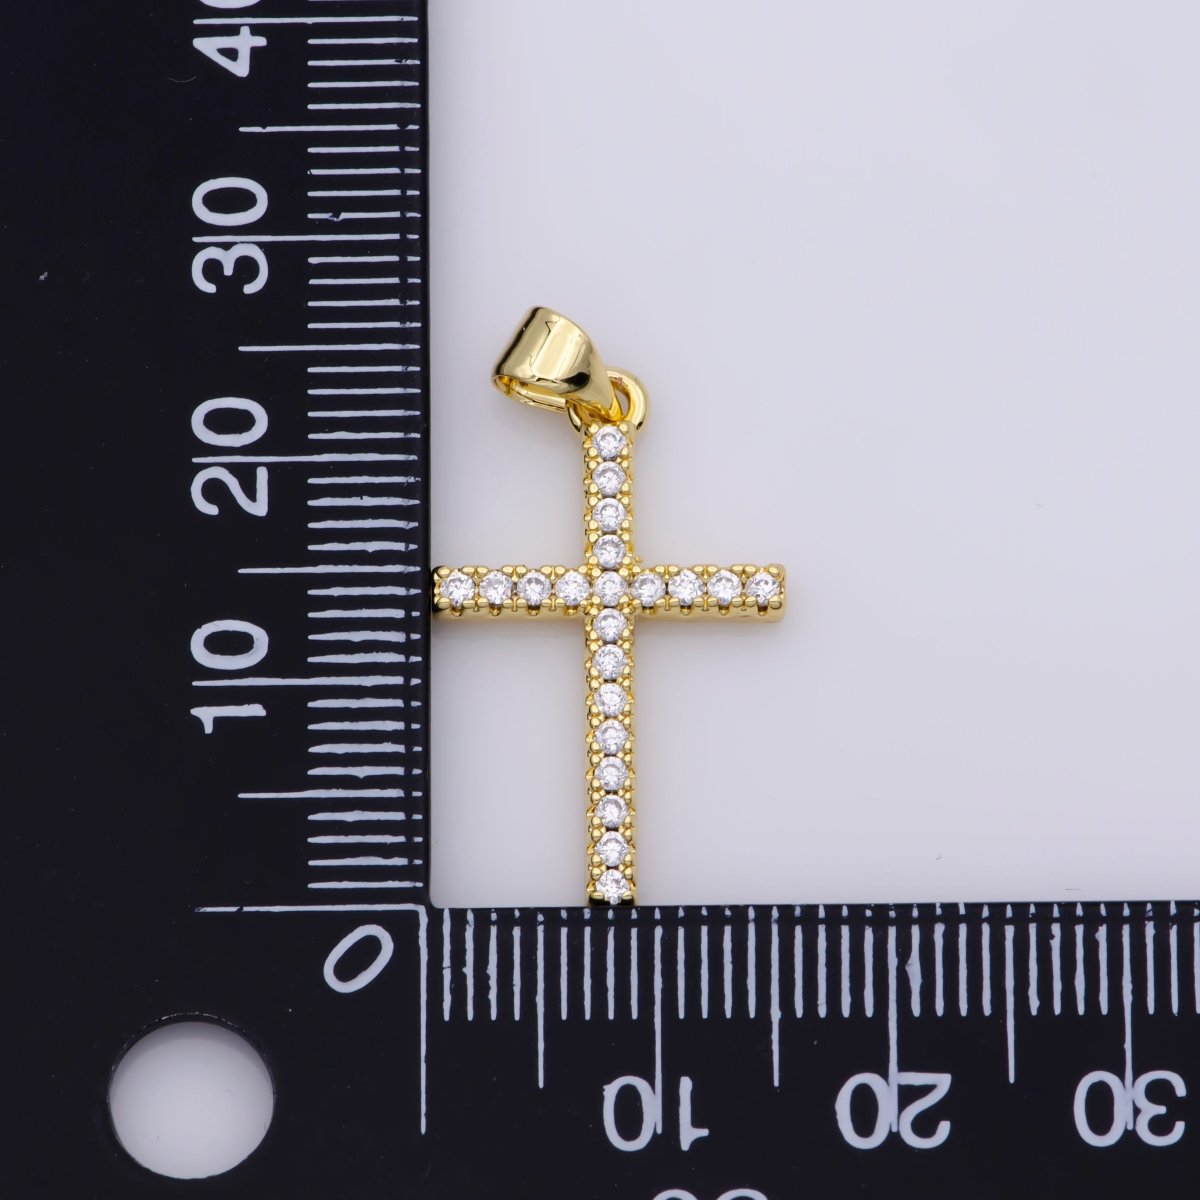 14K Gold Filled Minimalist Simple Cross Micro Pave Cubic Zirconia Necklace Pendant Bracelet Earring Charm Component for Religious Jewelry - DLUXCA